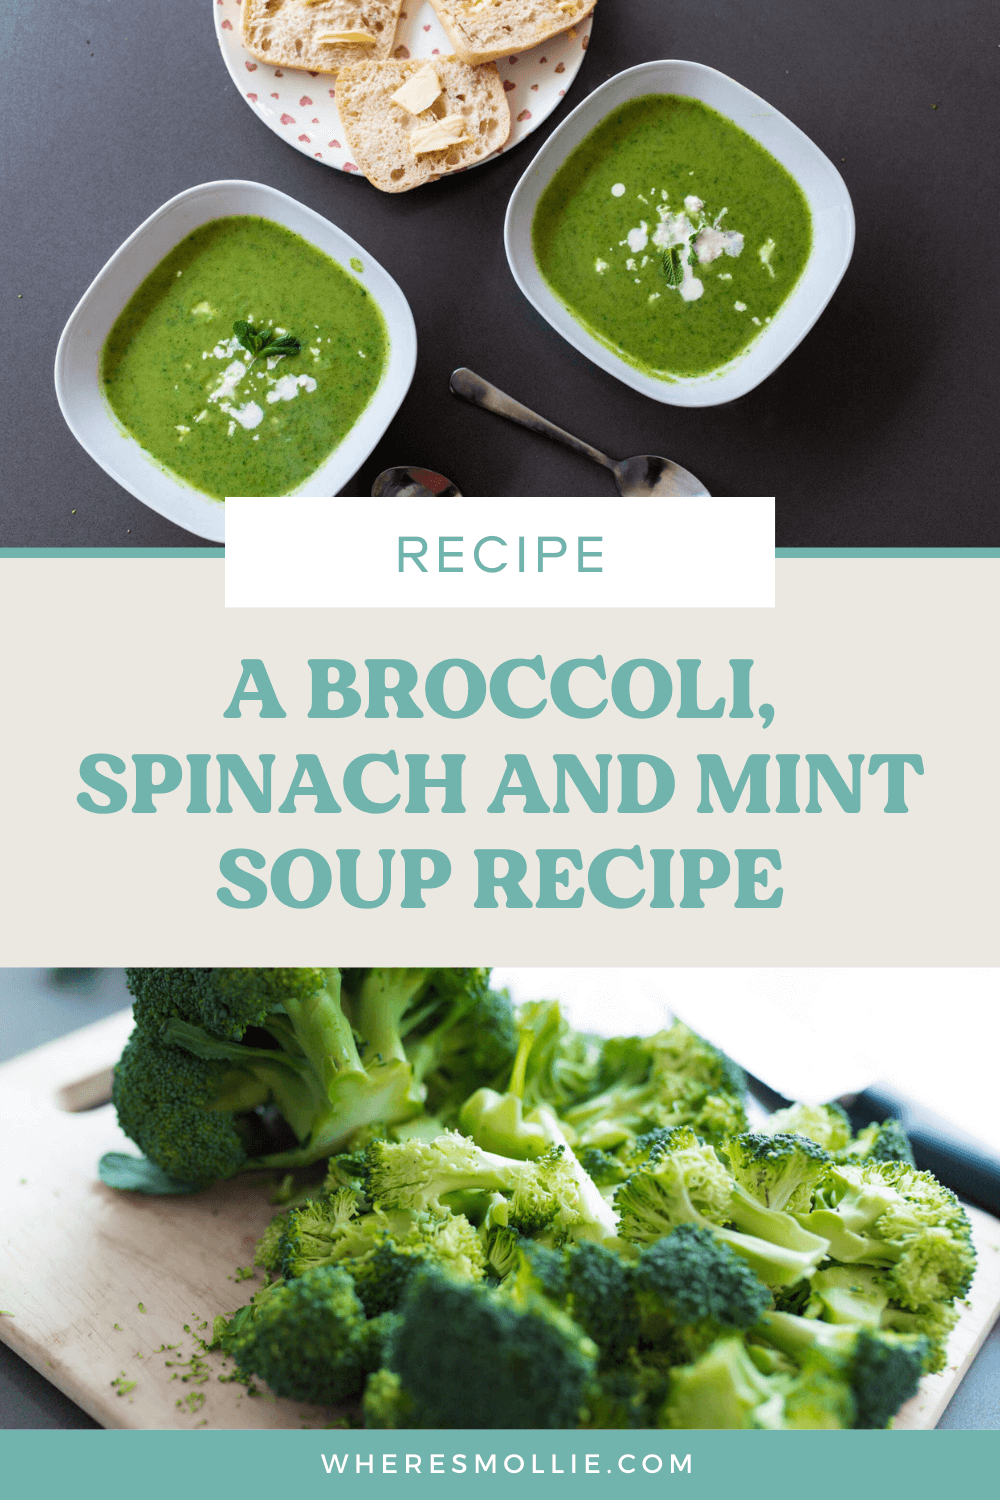 Recipe: Broccoli, spinach and mint soup